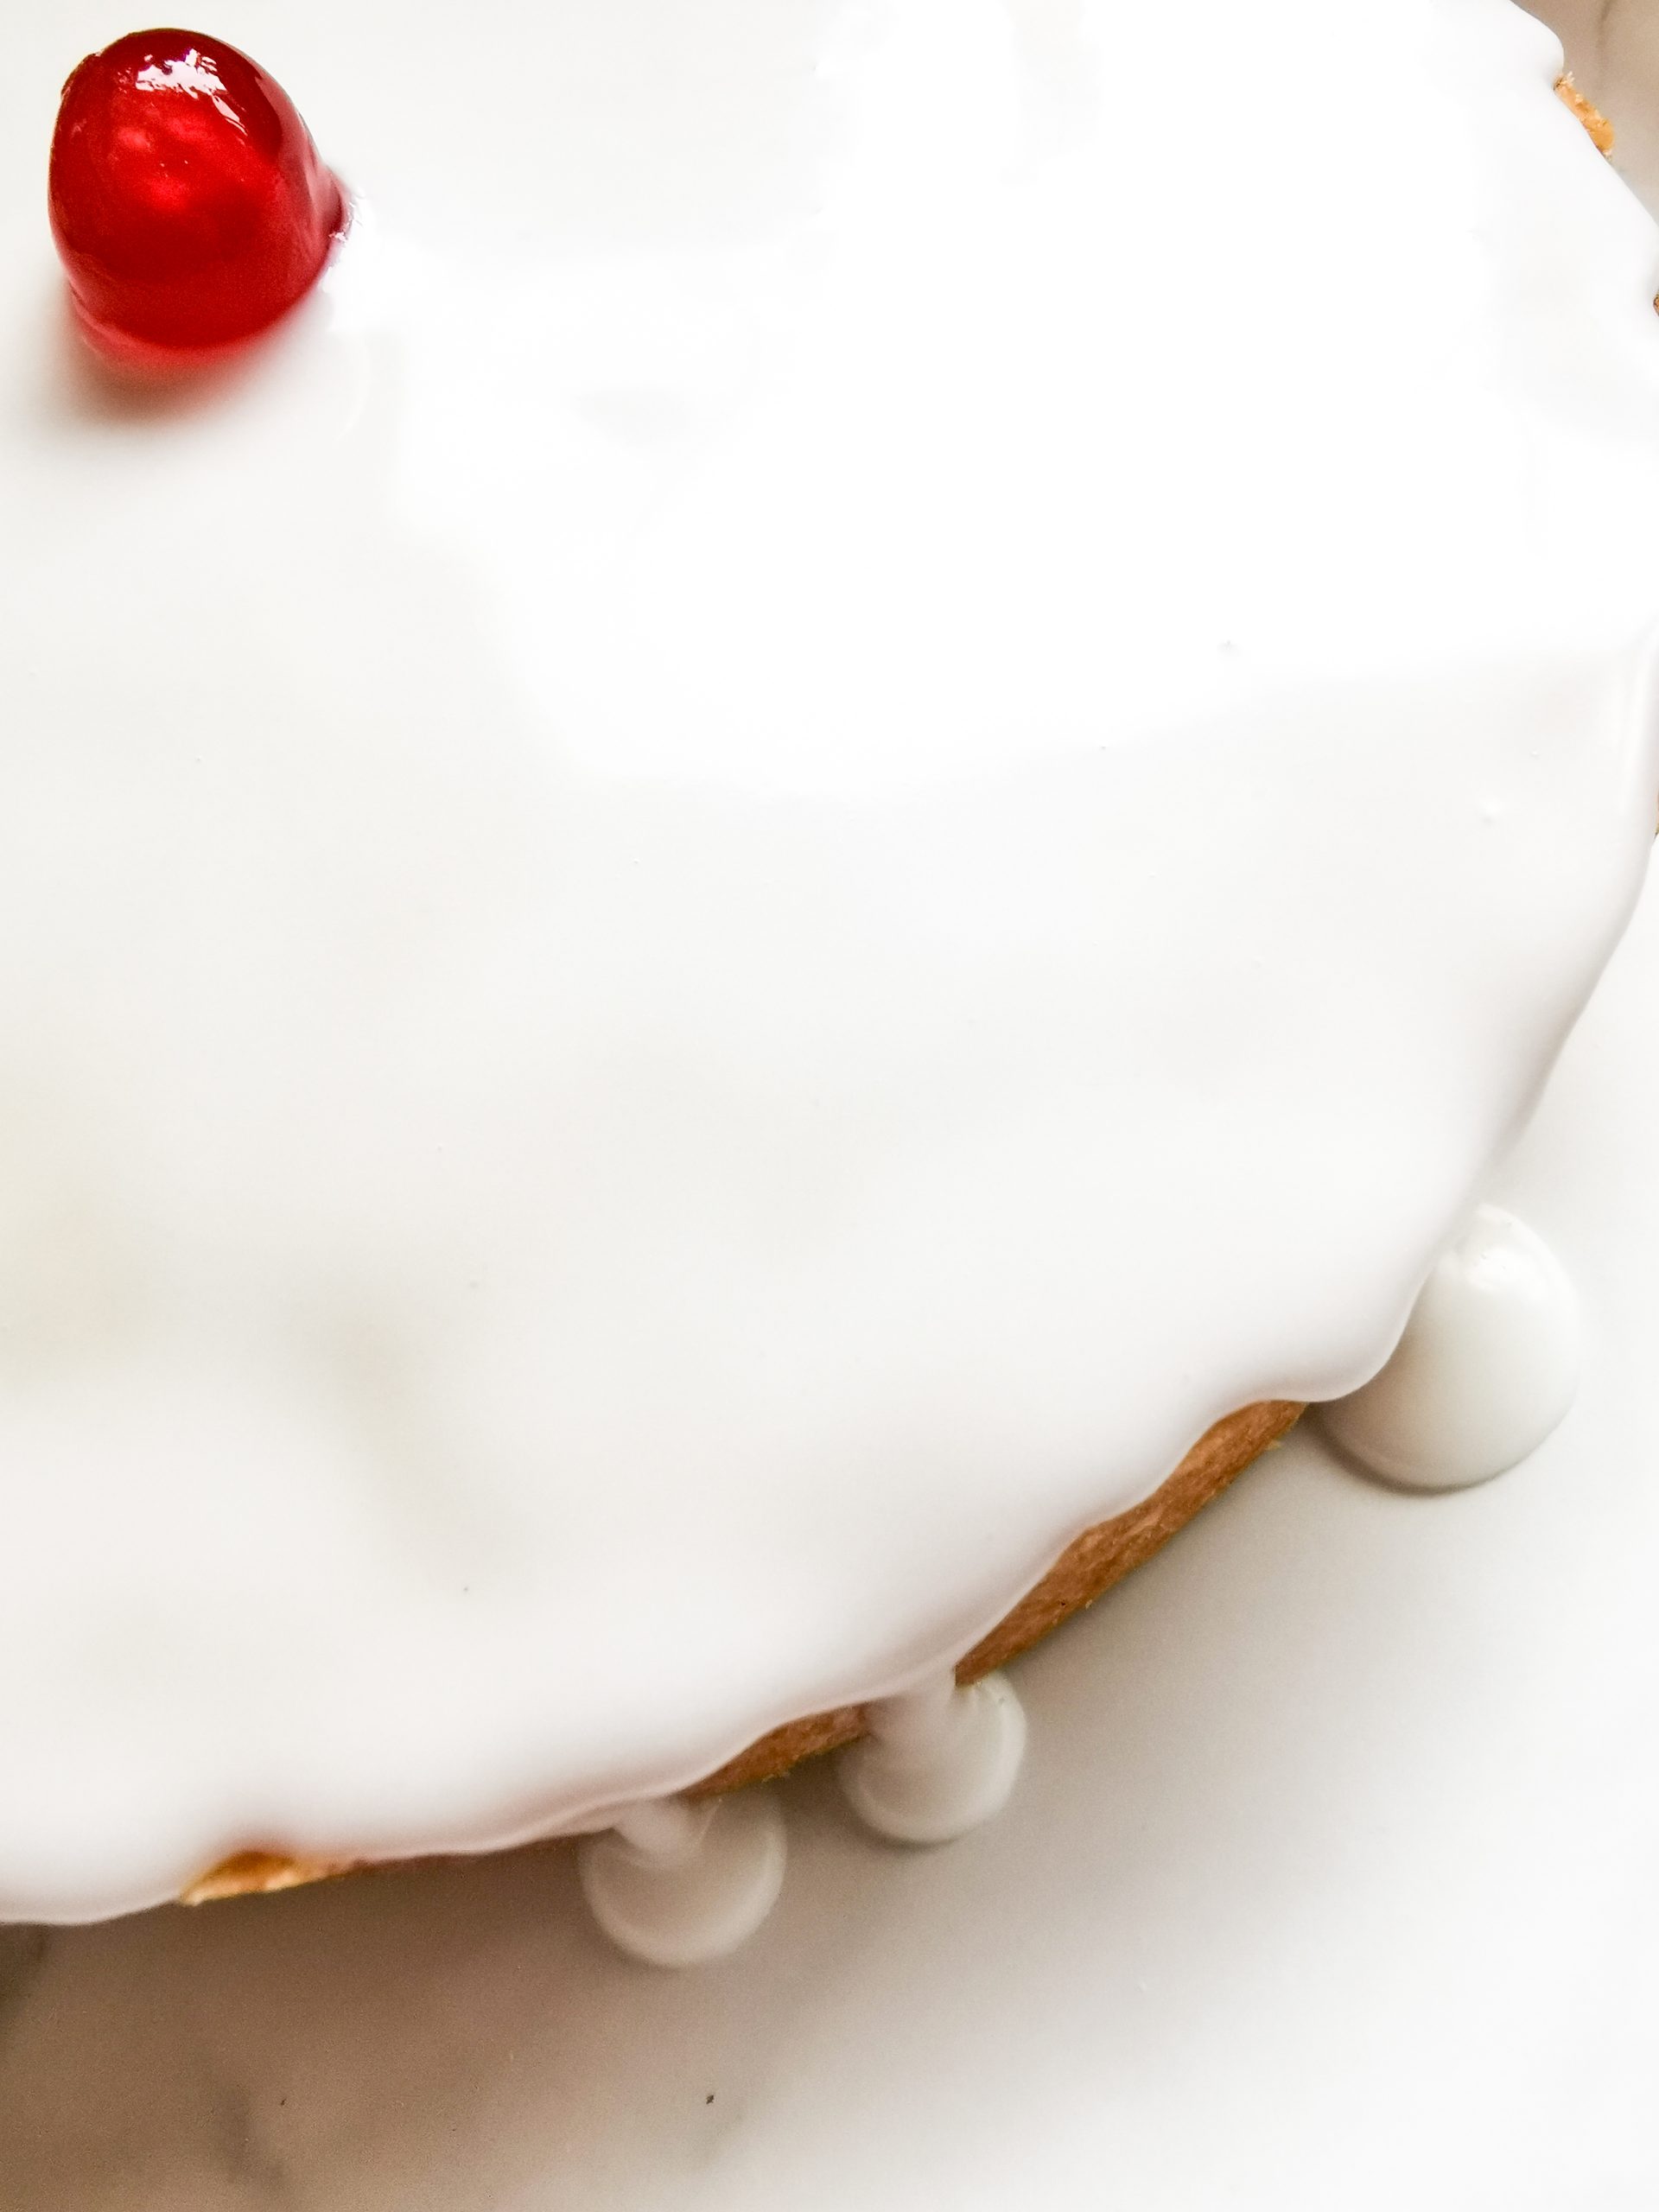 A large Empire biscuit topped with white icing and a red cherry on a white plate